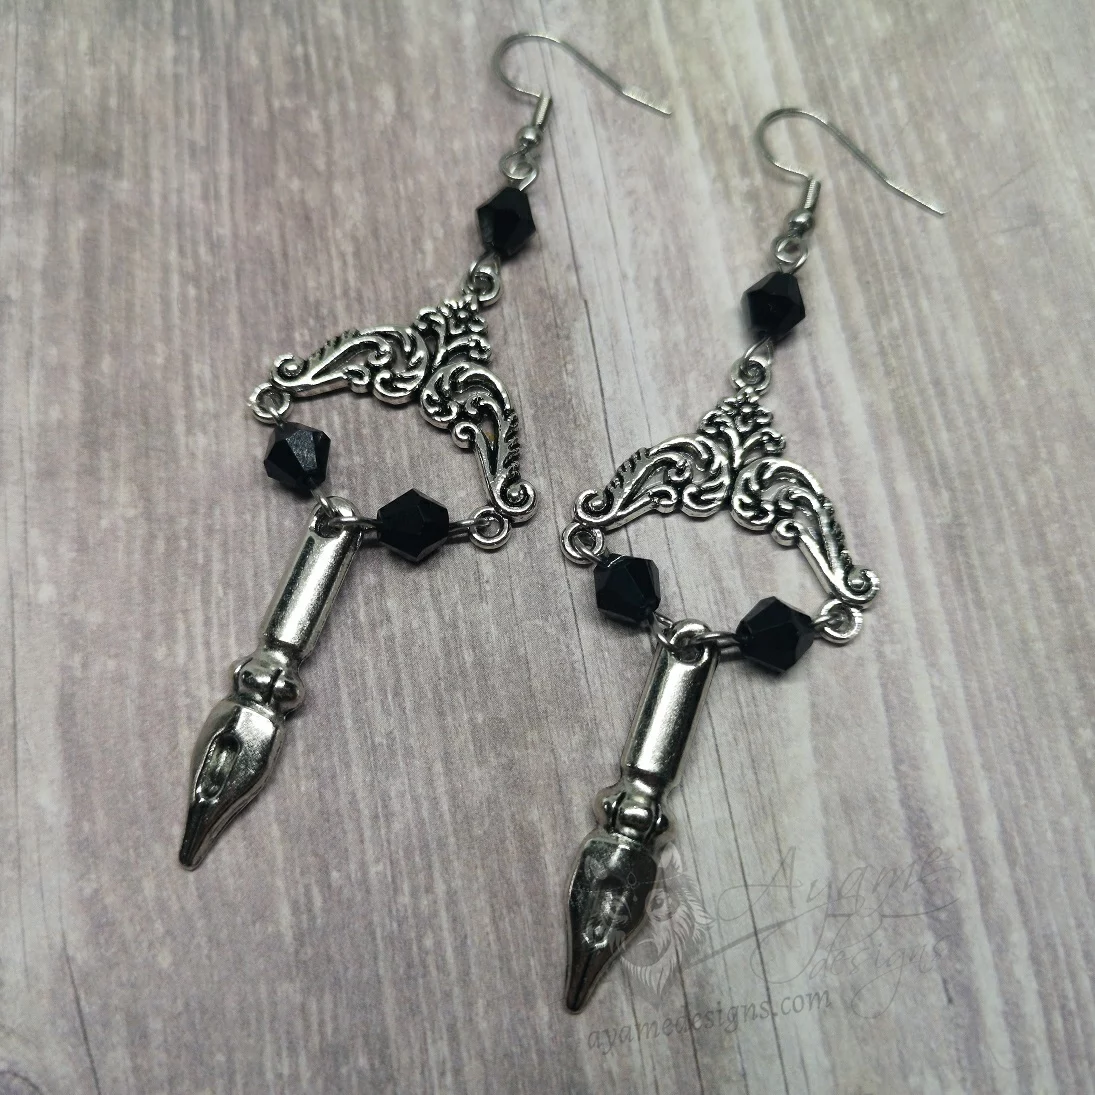 Handmade Victorian gothic earrings with filigree and pen tip charms, black Austrian crystal beads and stainless steel earring hooks